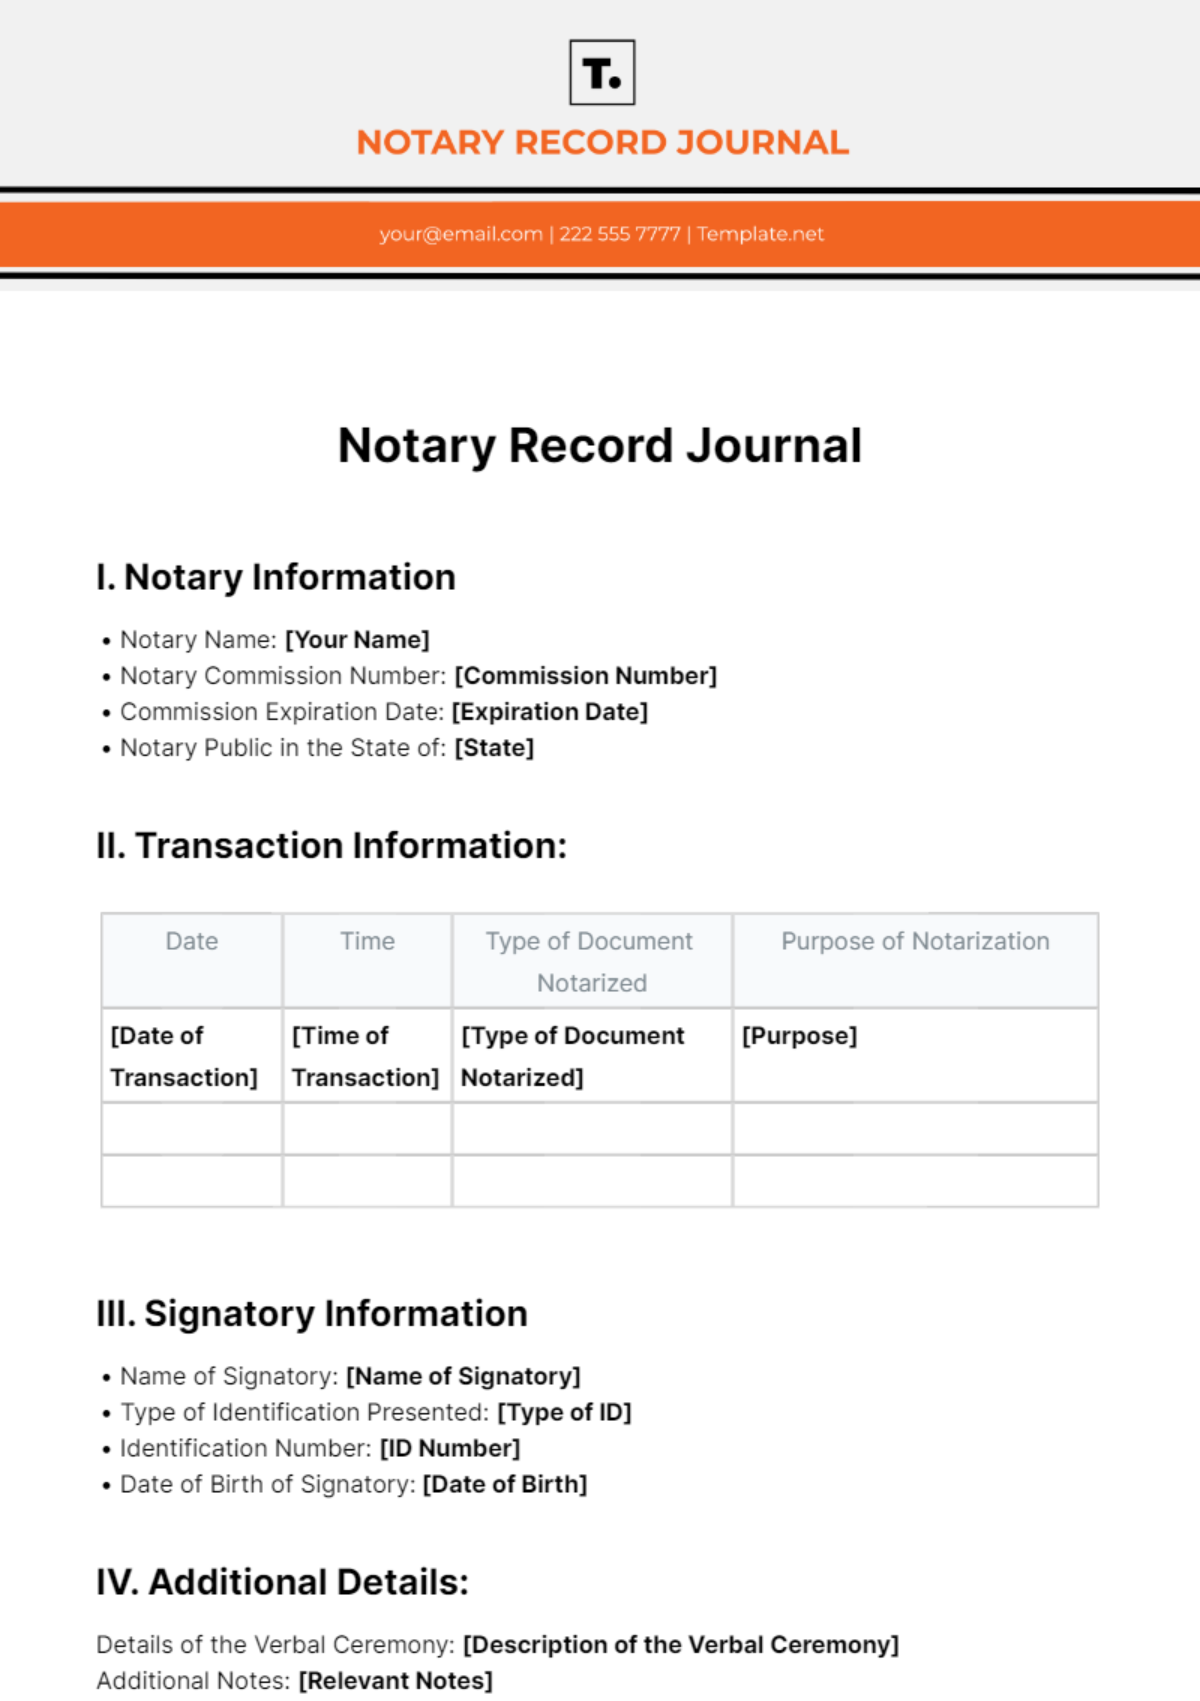 Free Notary Record Journal Template